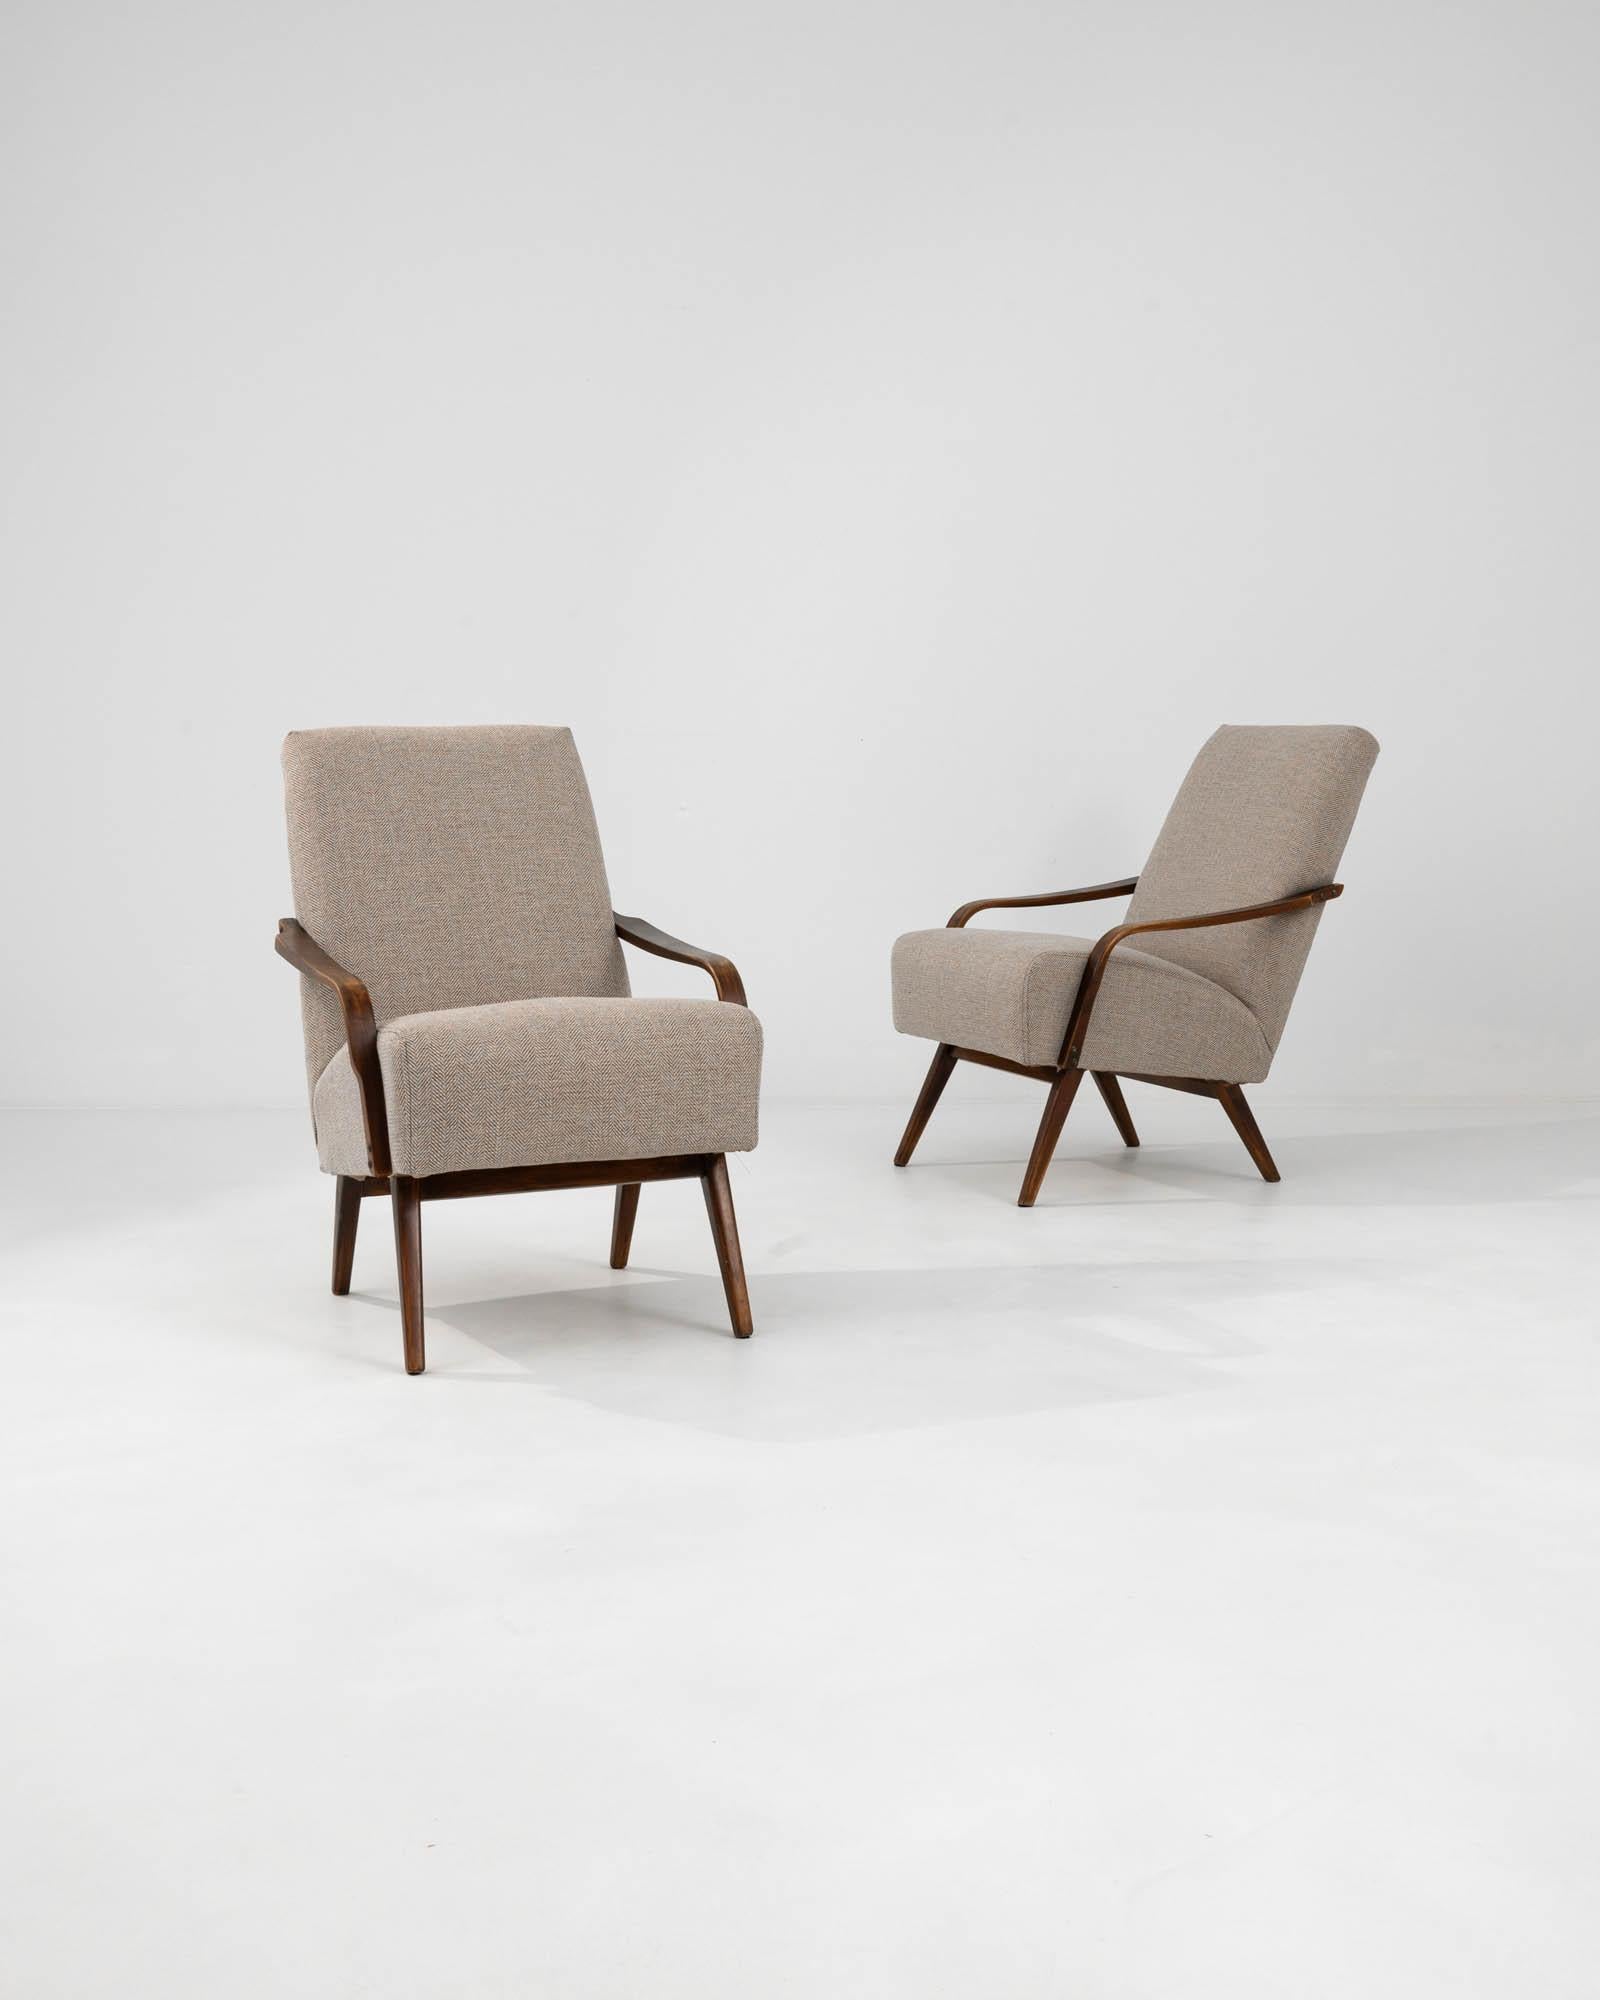 Introducing the 1960s Czech Upholstered Armchairs by TON, a pair that encapsulates the spirit of mid-century modern design with a hint of Eastern European charm. The clean, angular lines of the dark wooden frame are a nod to the minimalist